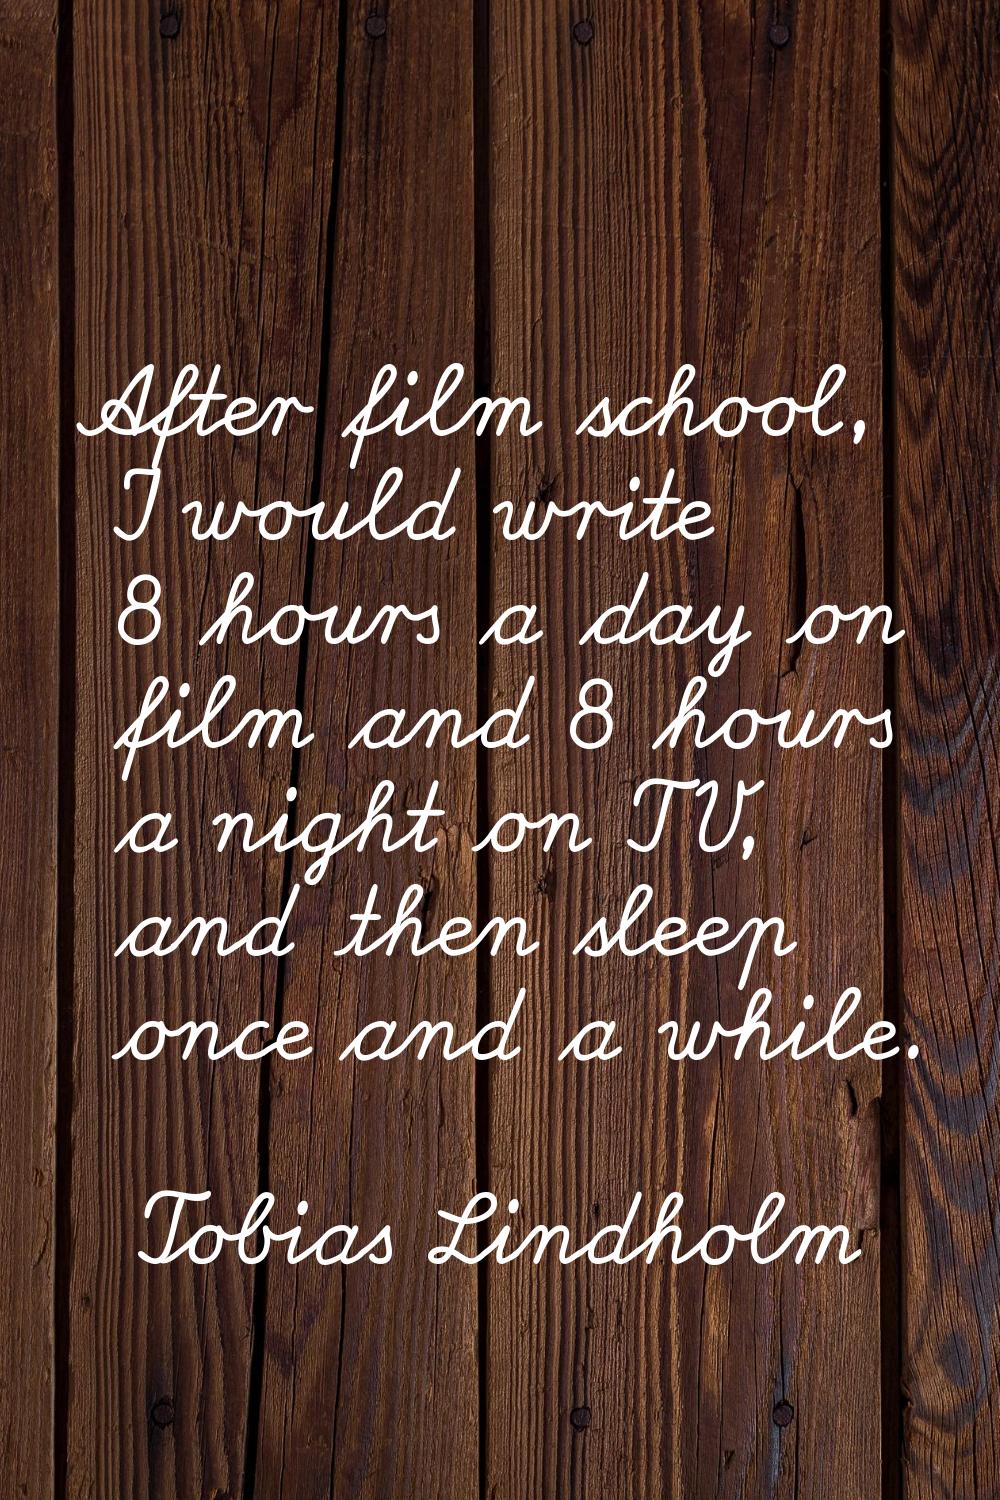 After film school, I would write 8 hours a day on film and 8 hours a night on TV, and then sleep on